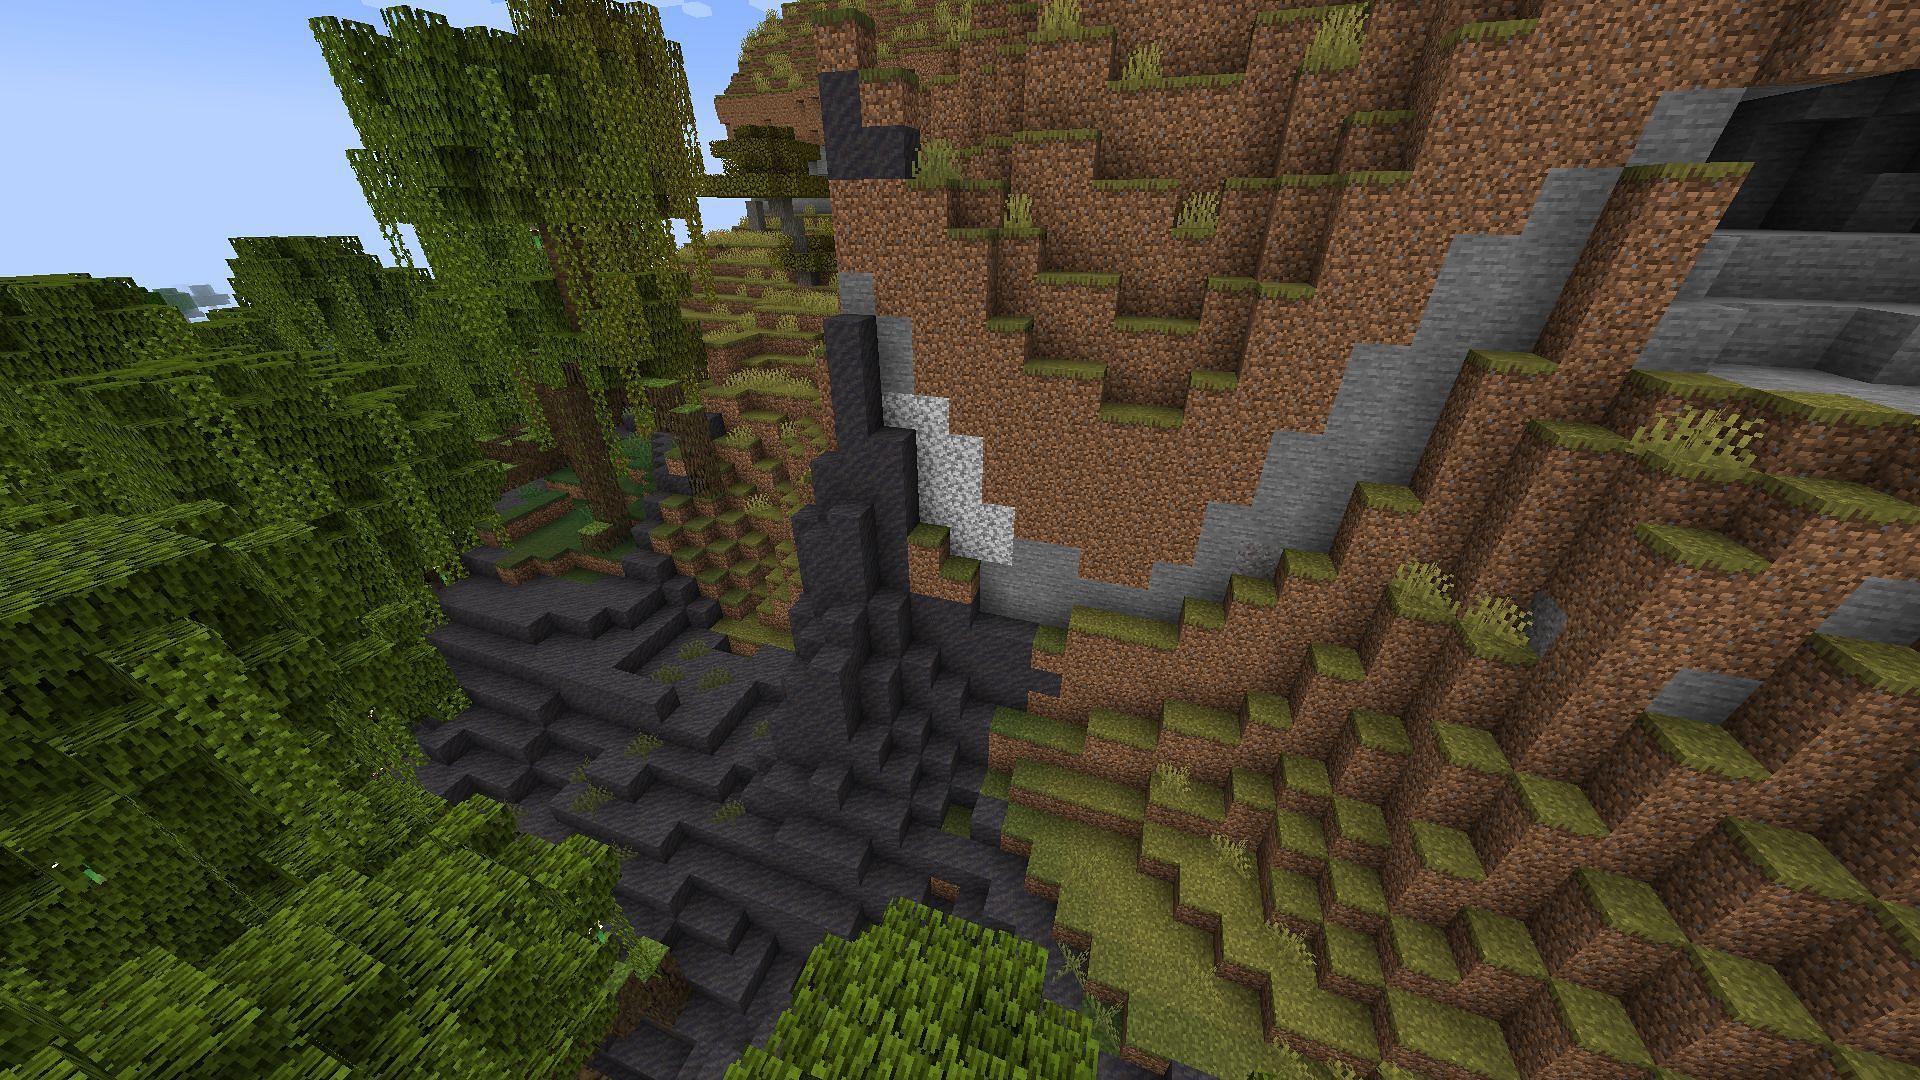 Mud blocks can be spotted from far away thanks to their darker shade (Image via Mojang)